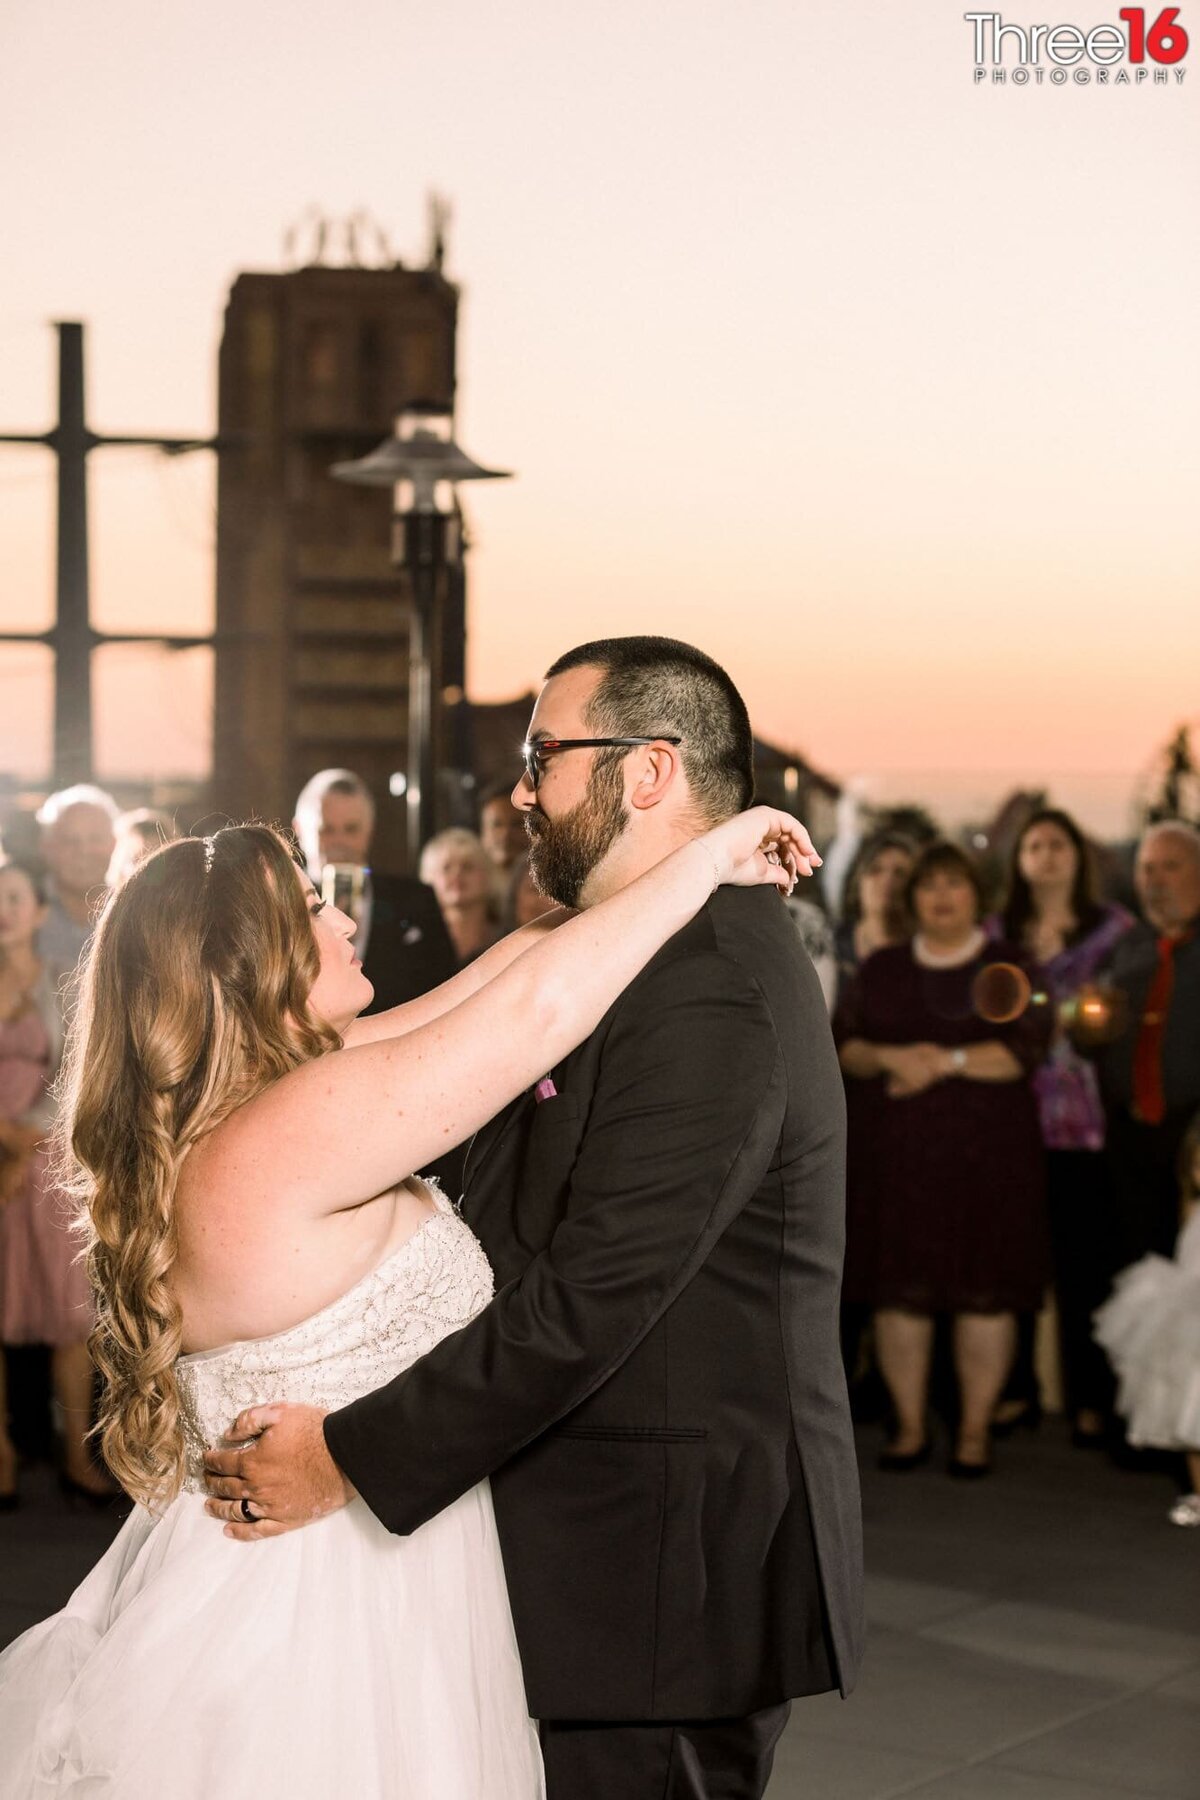 Bride and Groom share their first dance as the sun is about to set on the rooftop at The FIFTH Rooftop Restaurant & Bar